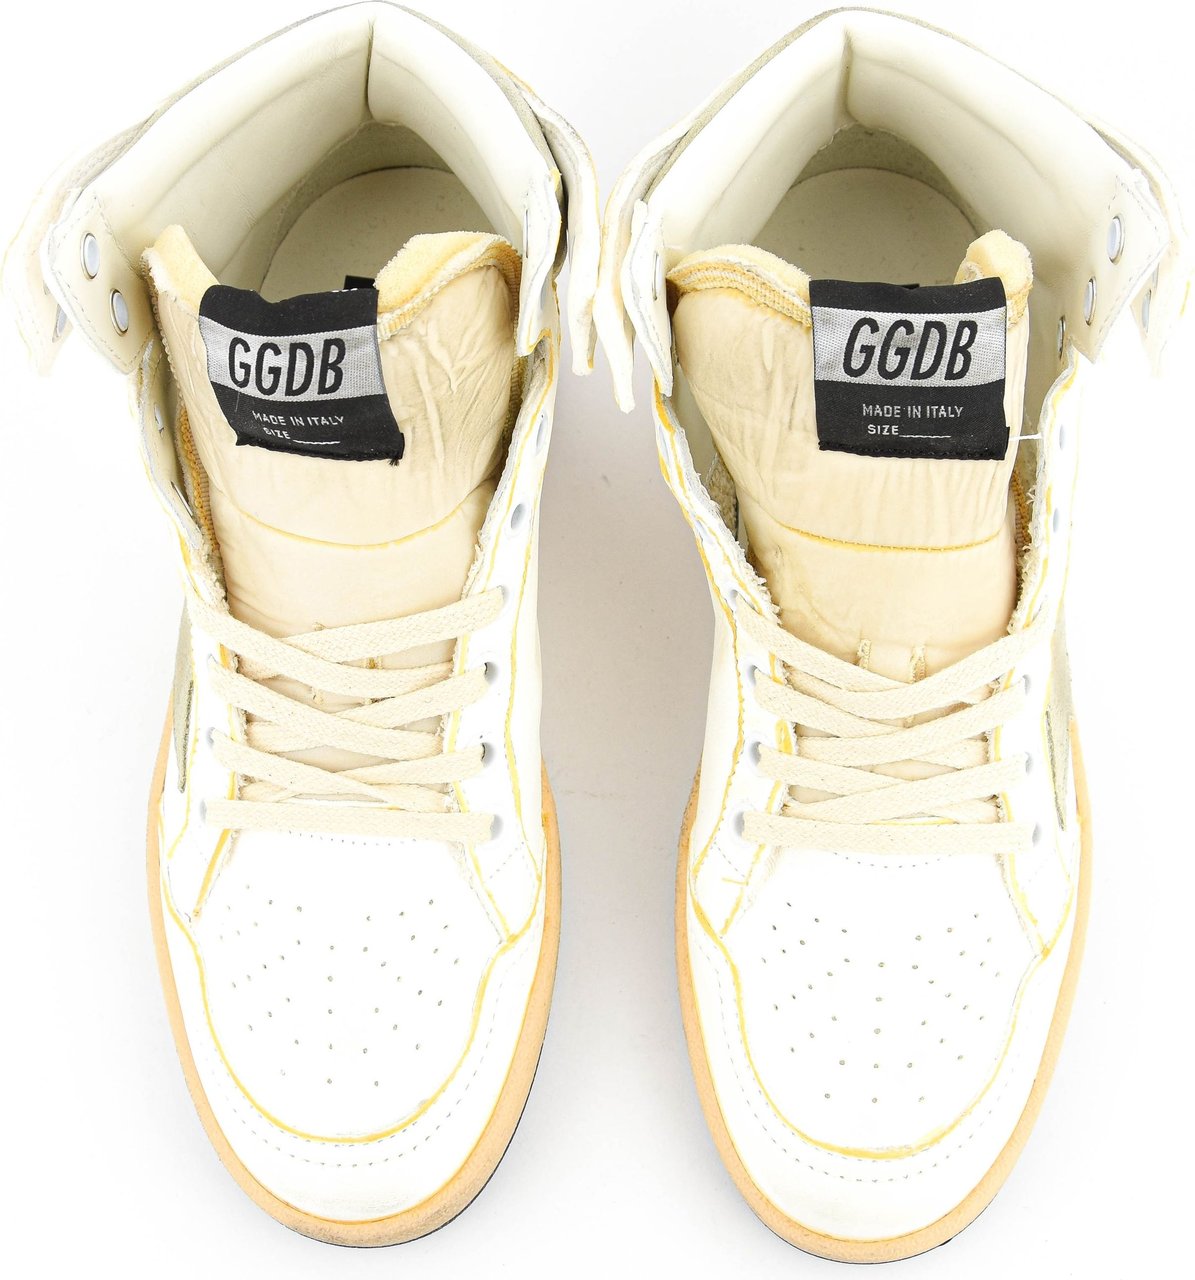 Golden Goose Sky Star White Taupe Divers